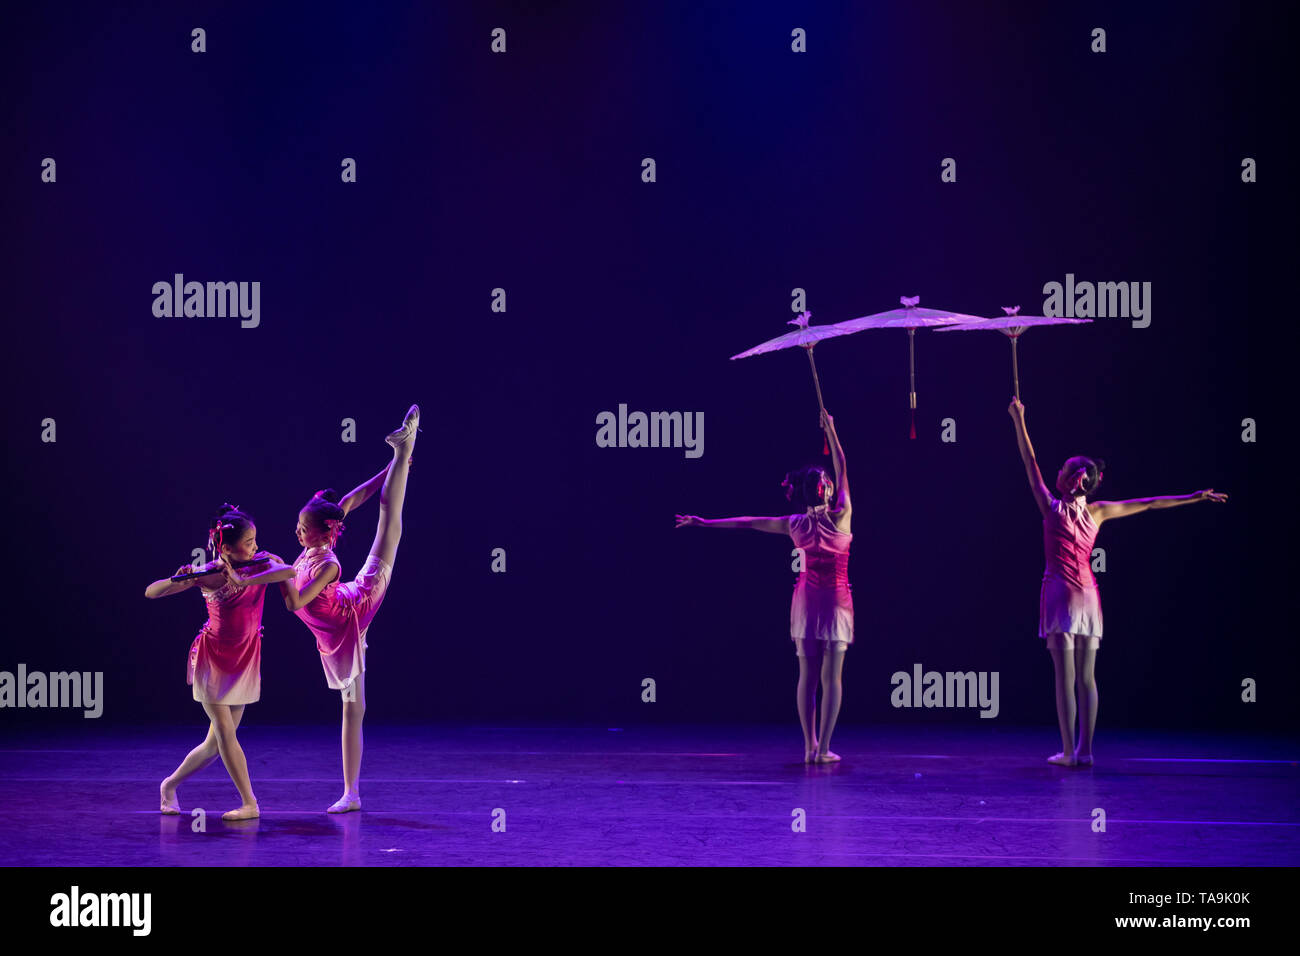 Helsinki, Finland. 21st May, 2019. Children from the Nanjing Little Red Flower Art Troupe of China perform at the Alexander Theatre in Helsinki, Finland, May 21, 2019. Credit: Matti Matikainen/Xinhua/Alamy Live News Stock Photo